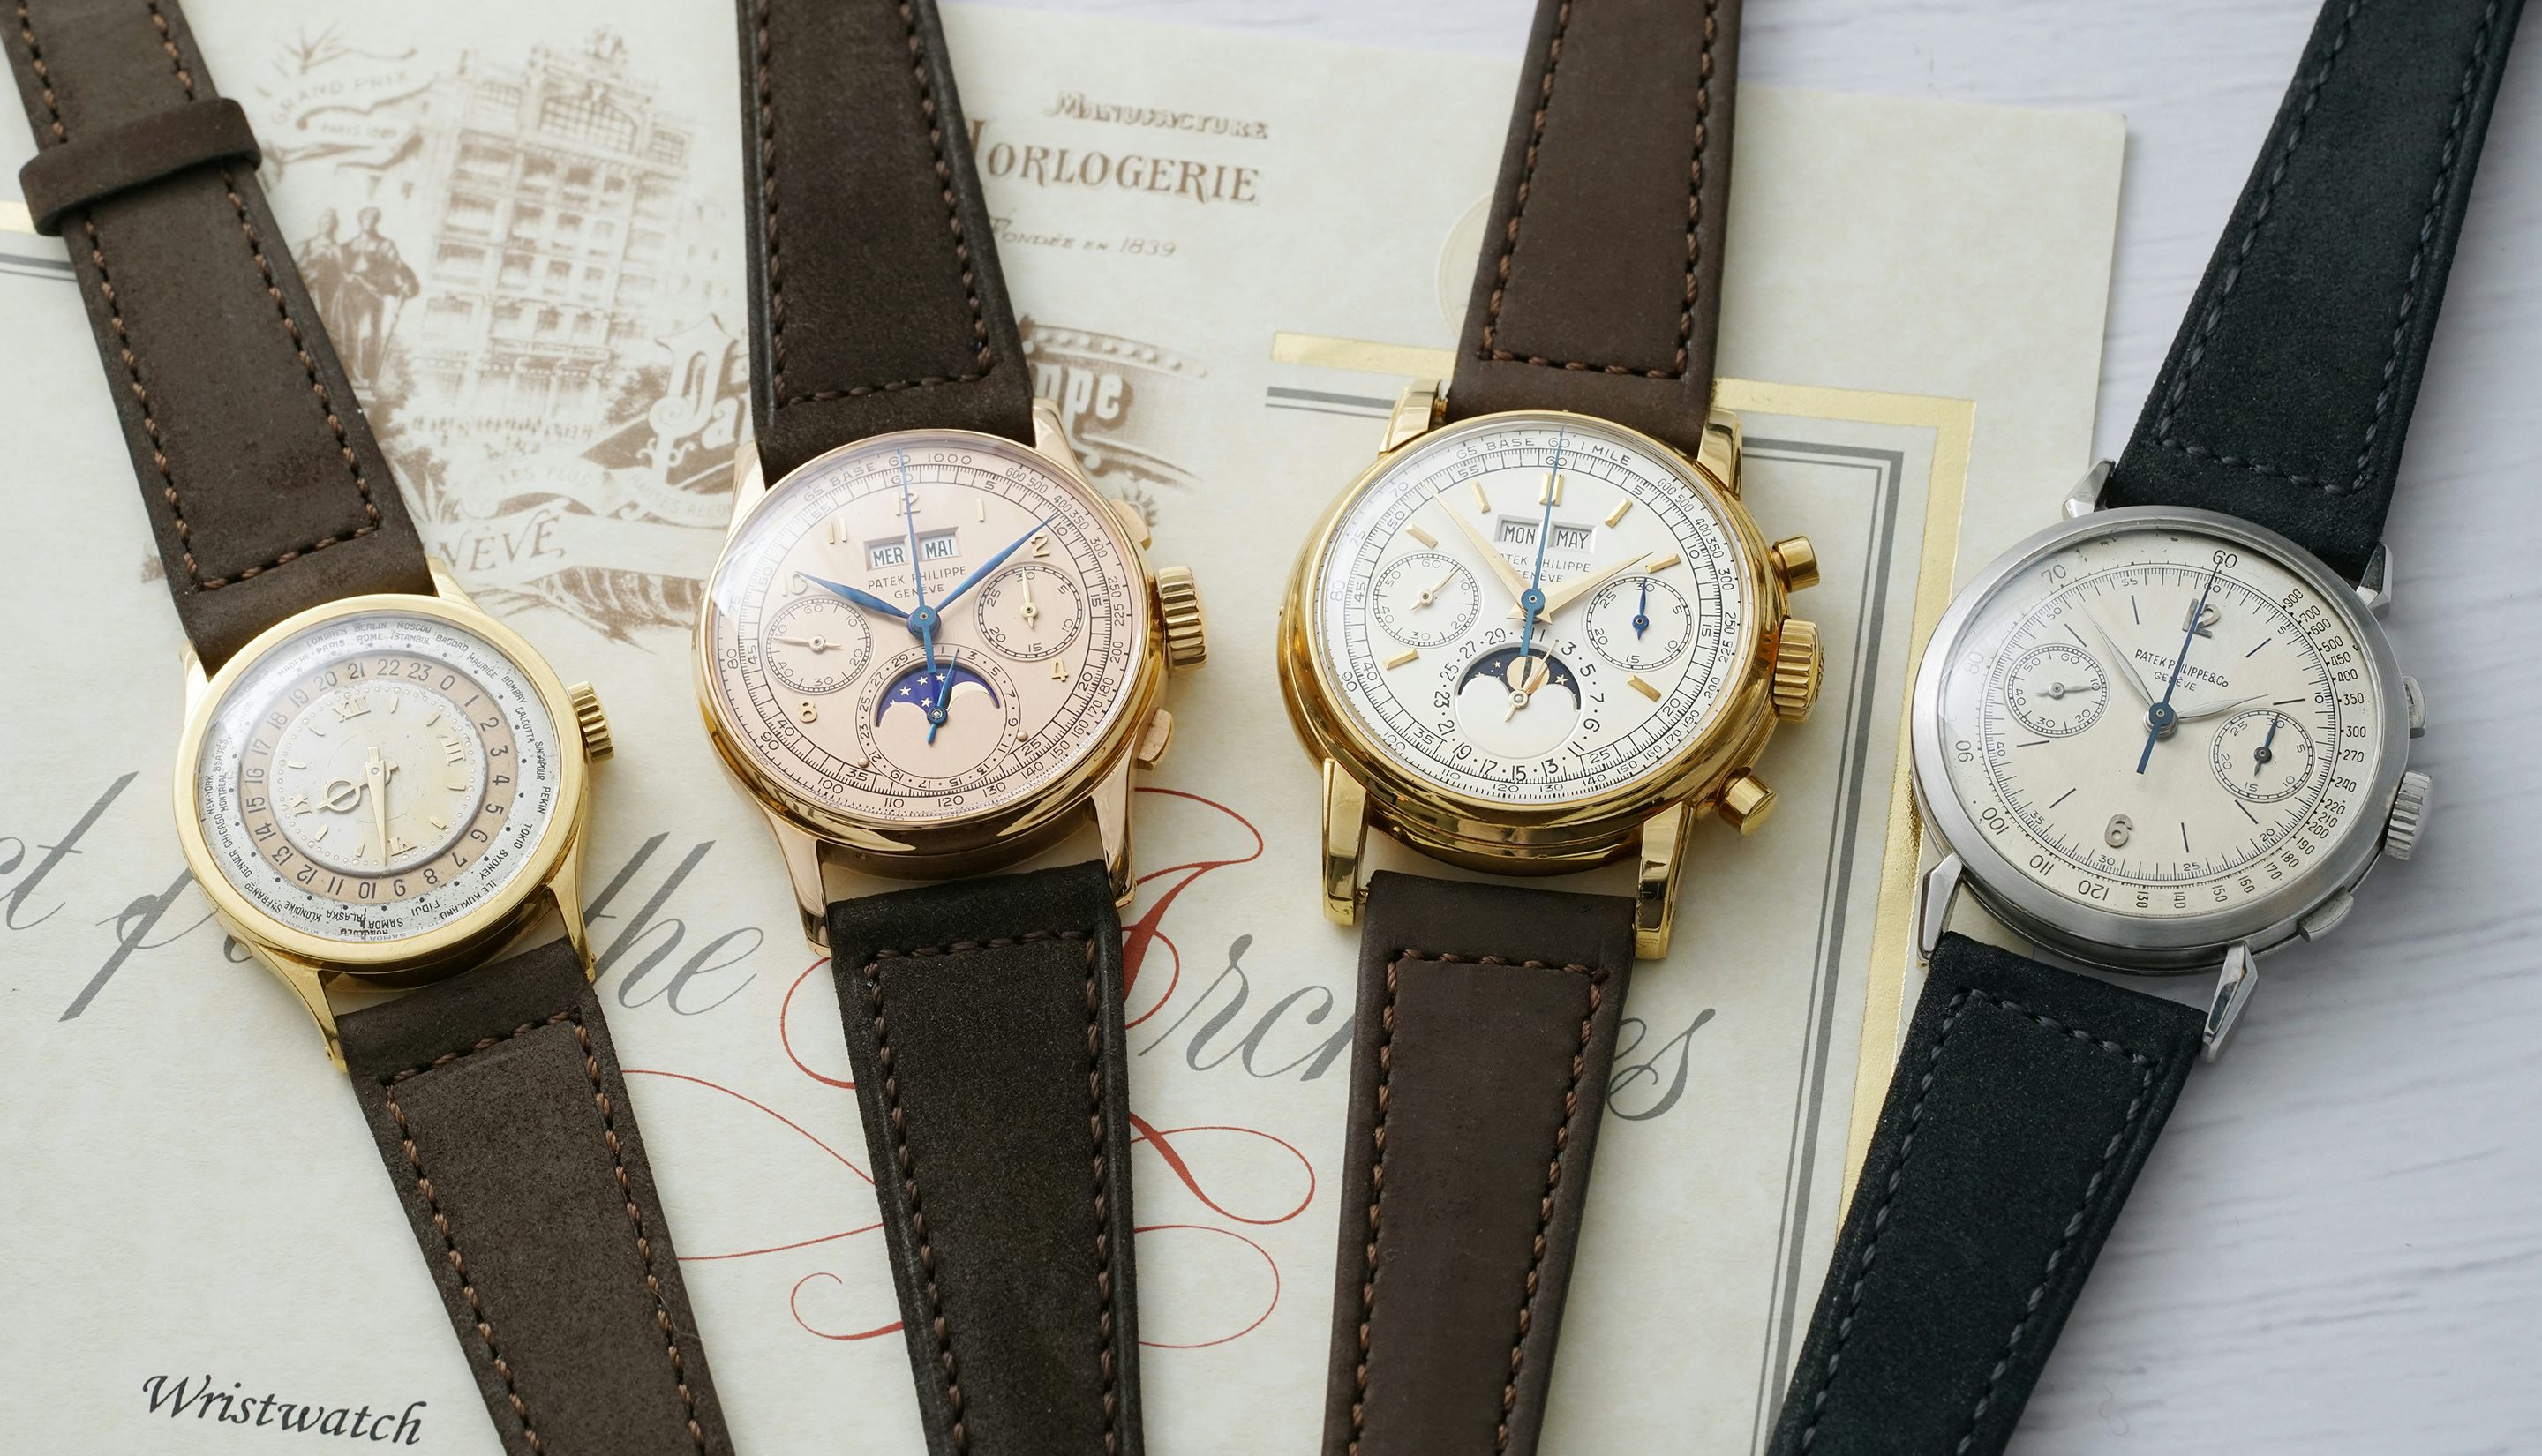 Jean-Claude Biver Presents His Personal Watch Collection At Phillips'  London Auction House